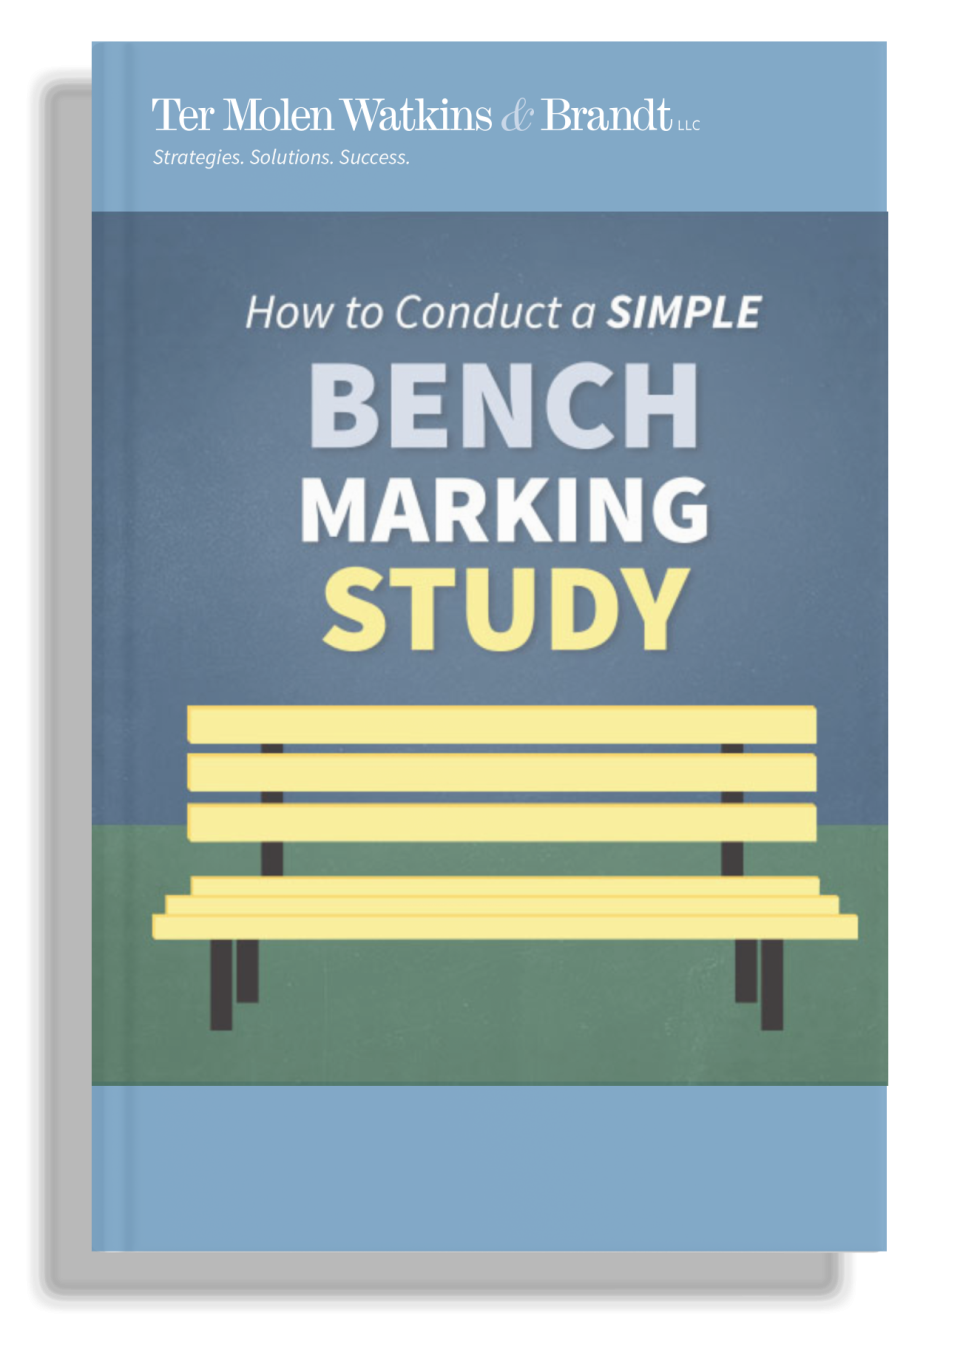 Benchmarking Study Download